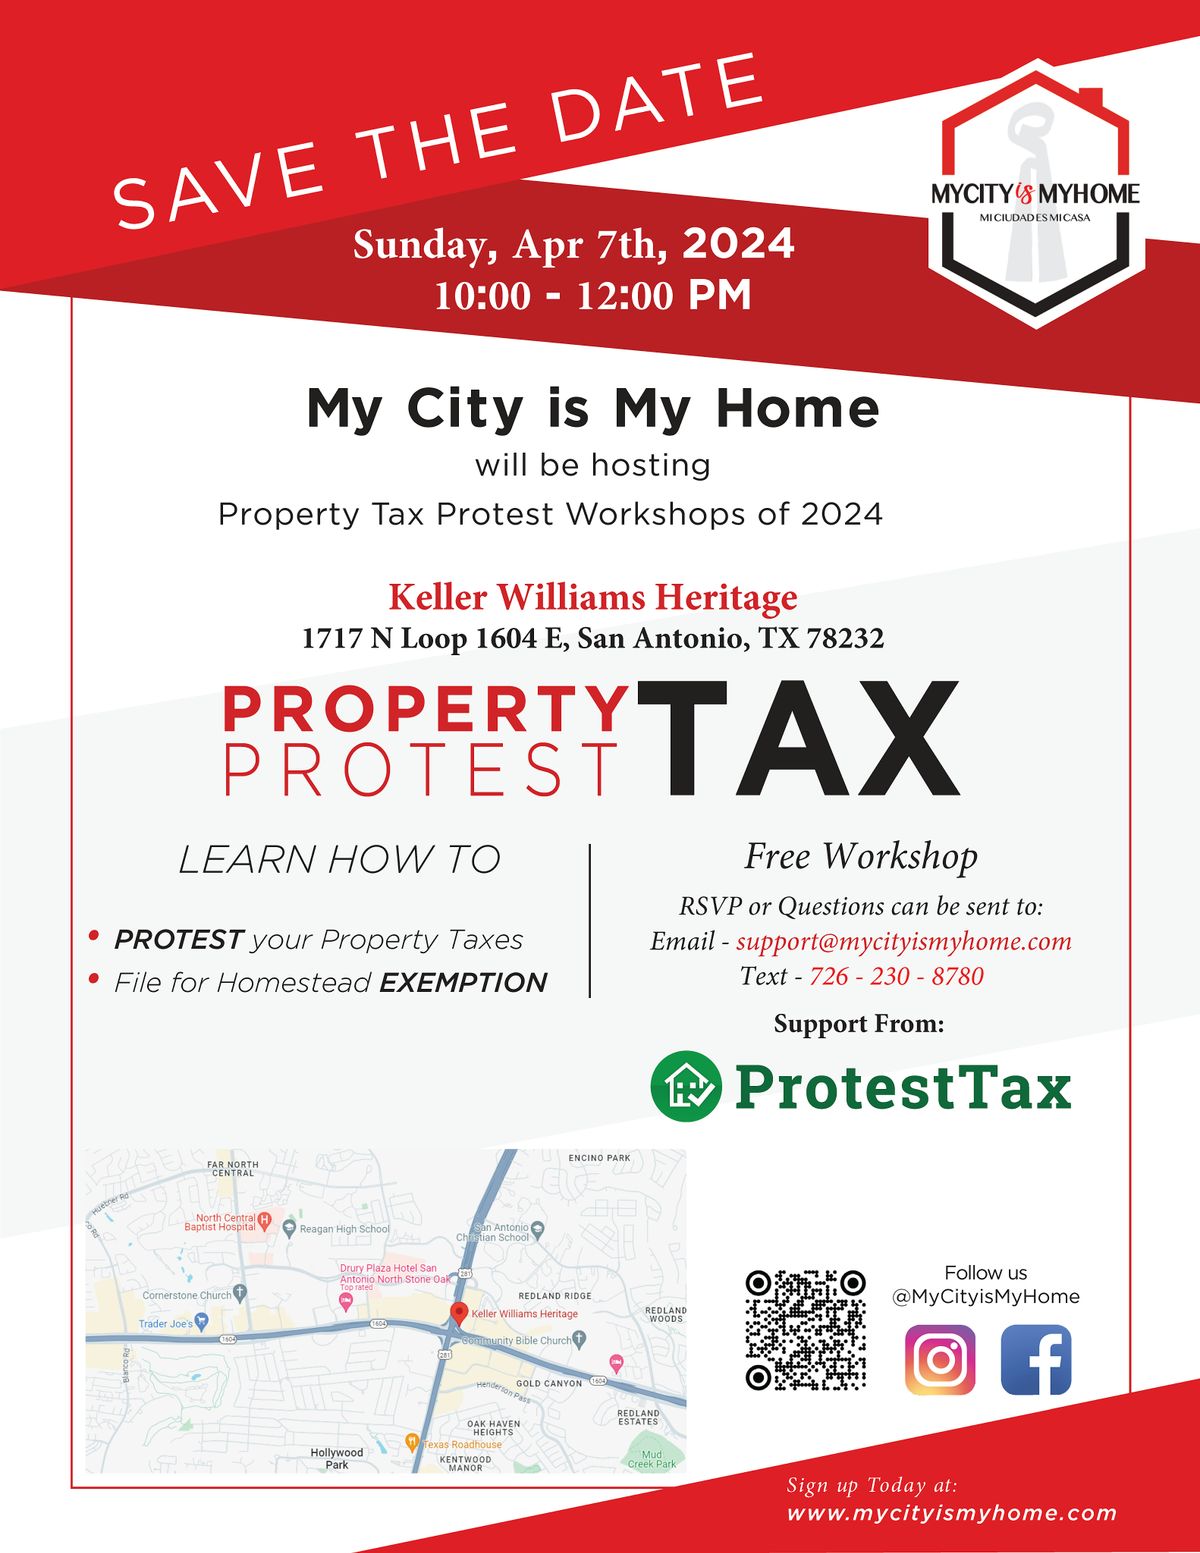 Learn How To Protest Property Taxes